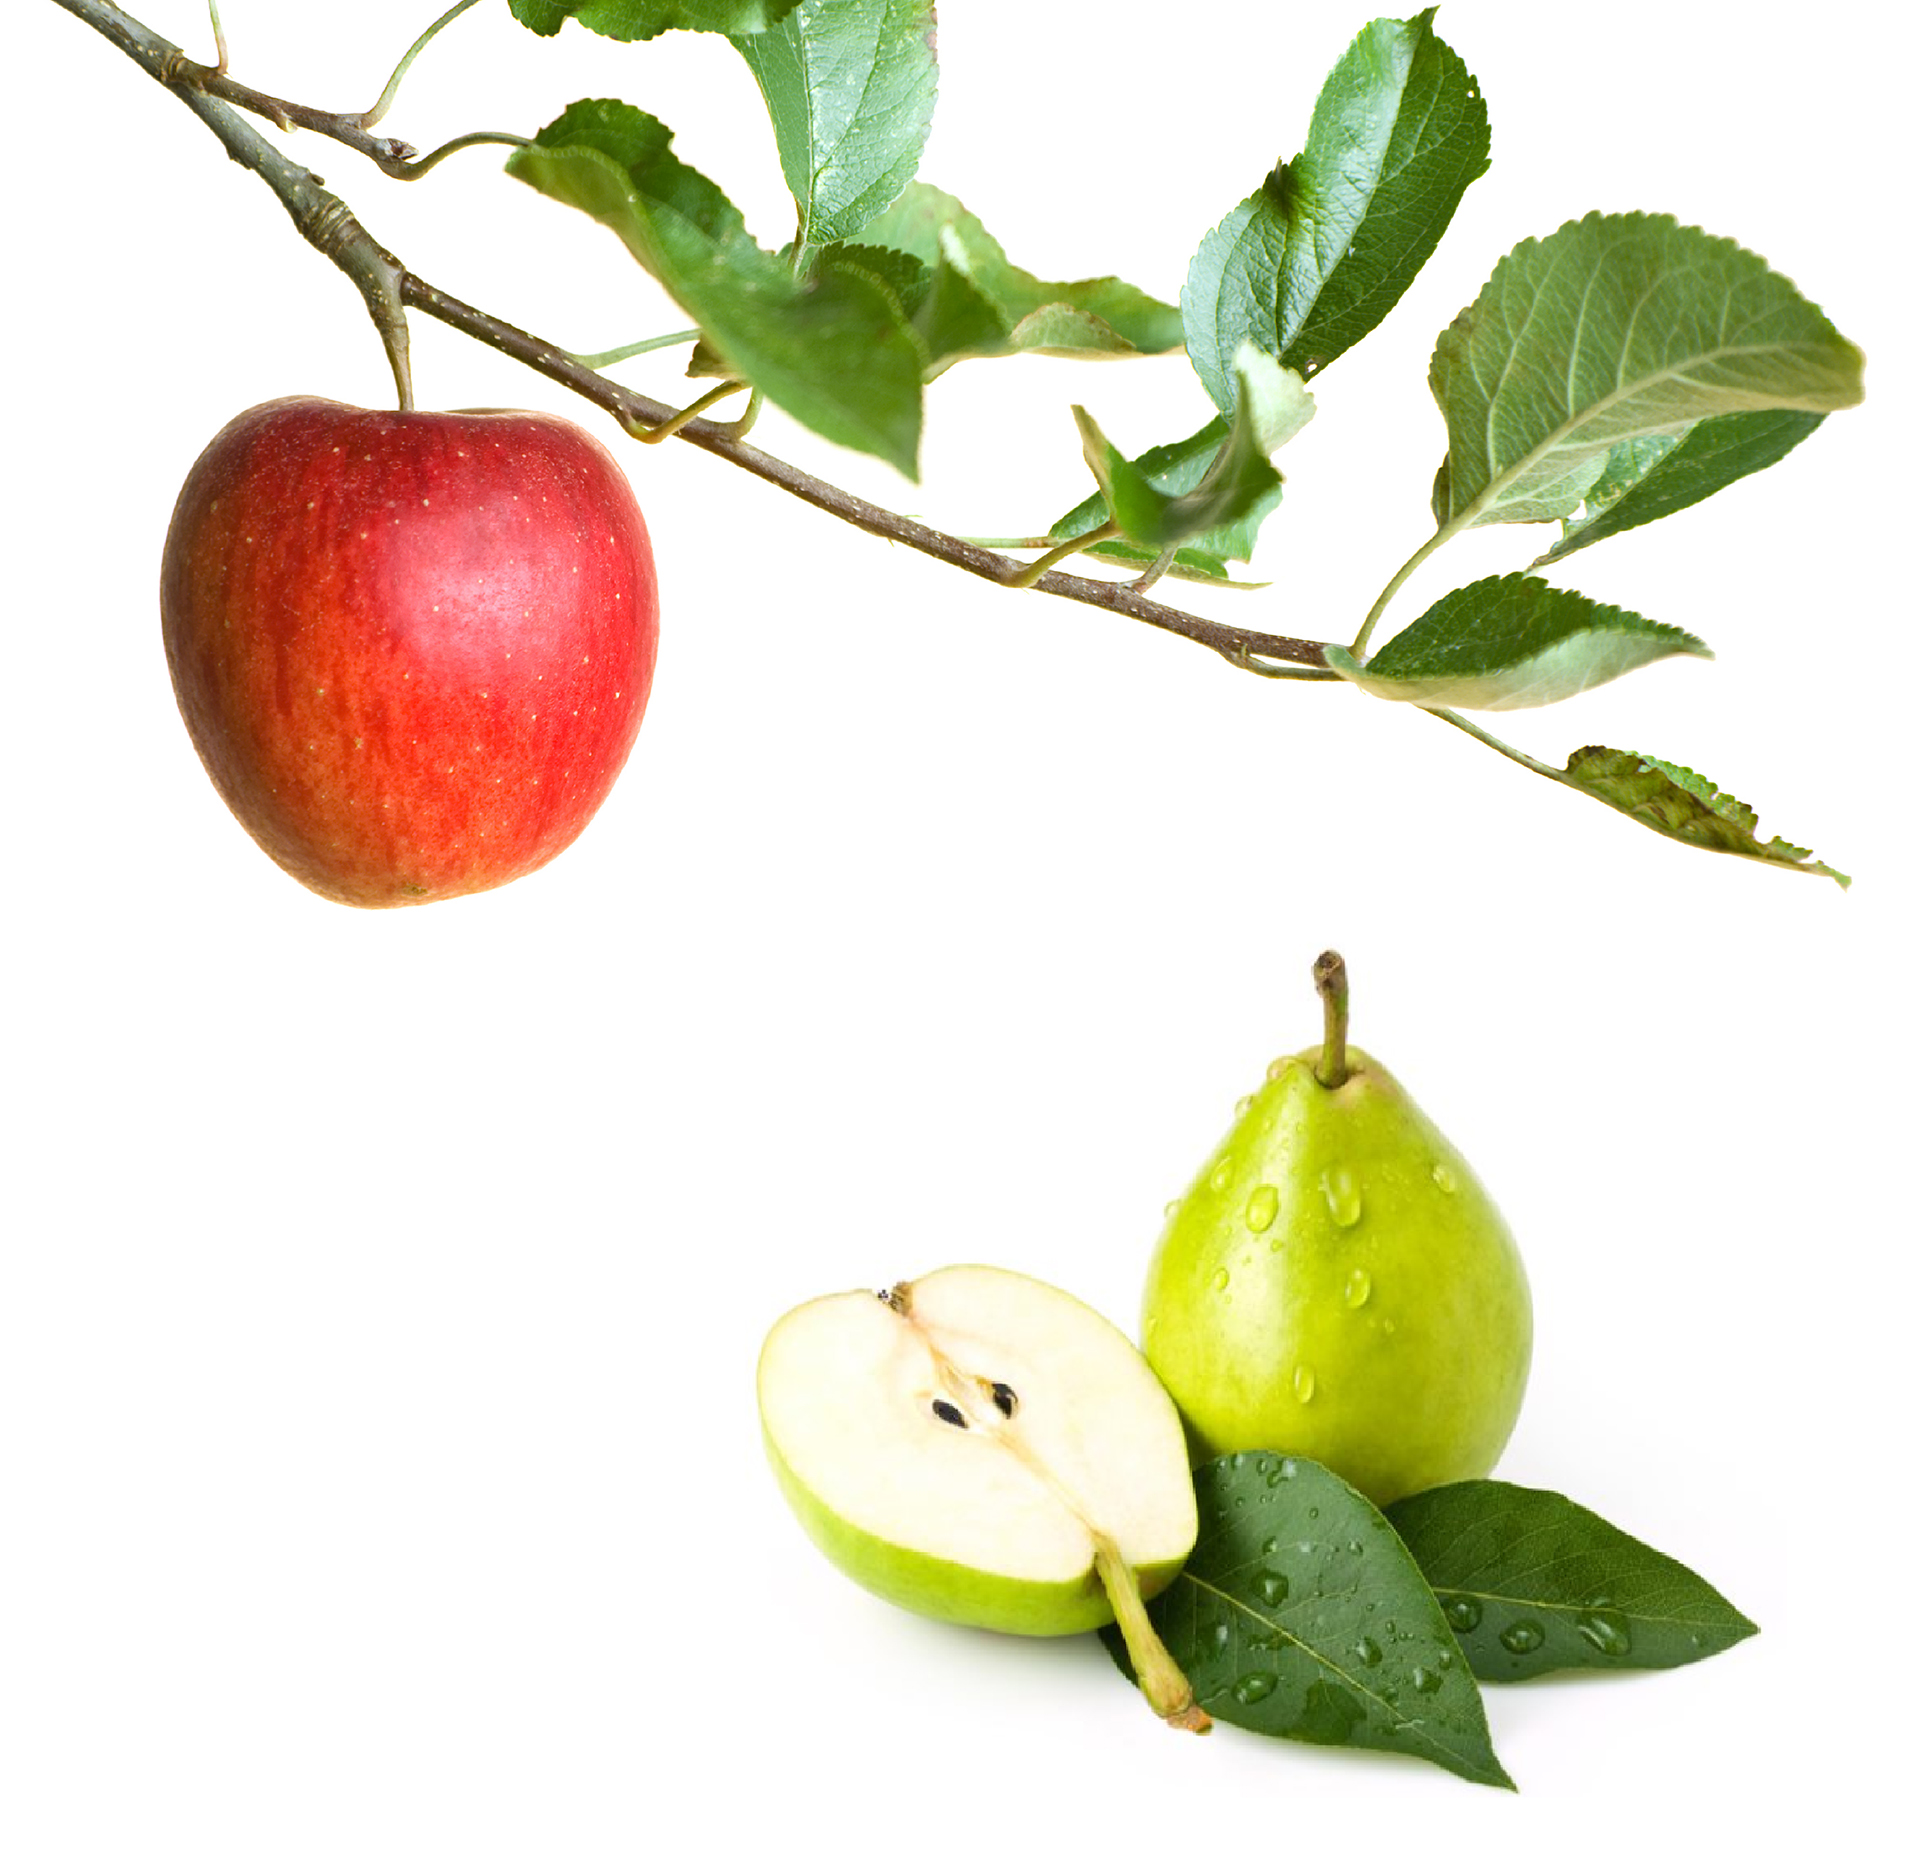 Foliar Application Of Potassium Nitrate Increased Brix In Apples And 